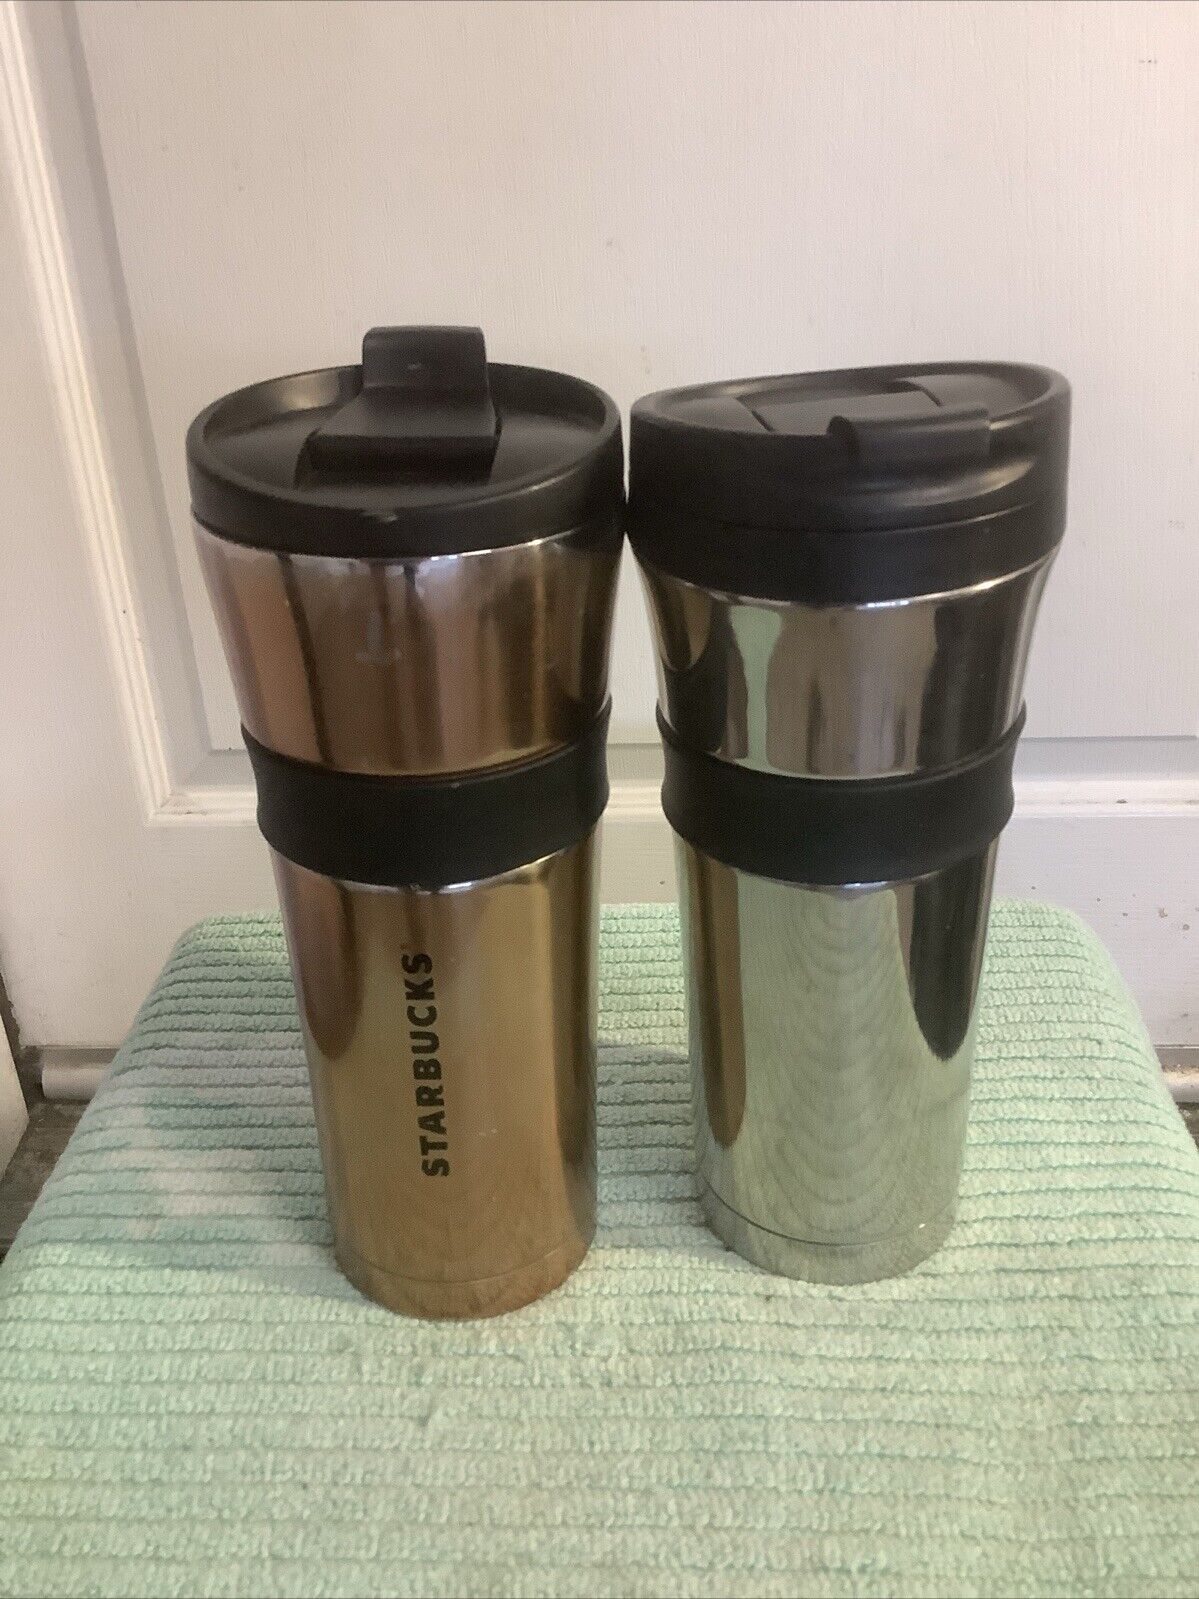 Lot of 2 Starbucks Chrome/Copper Stainless Steel Tumblers W/Rubber Grips 2016